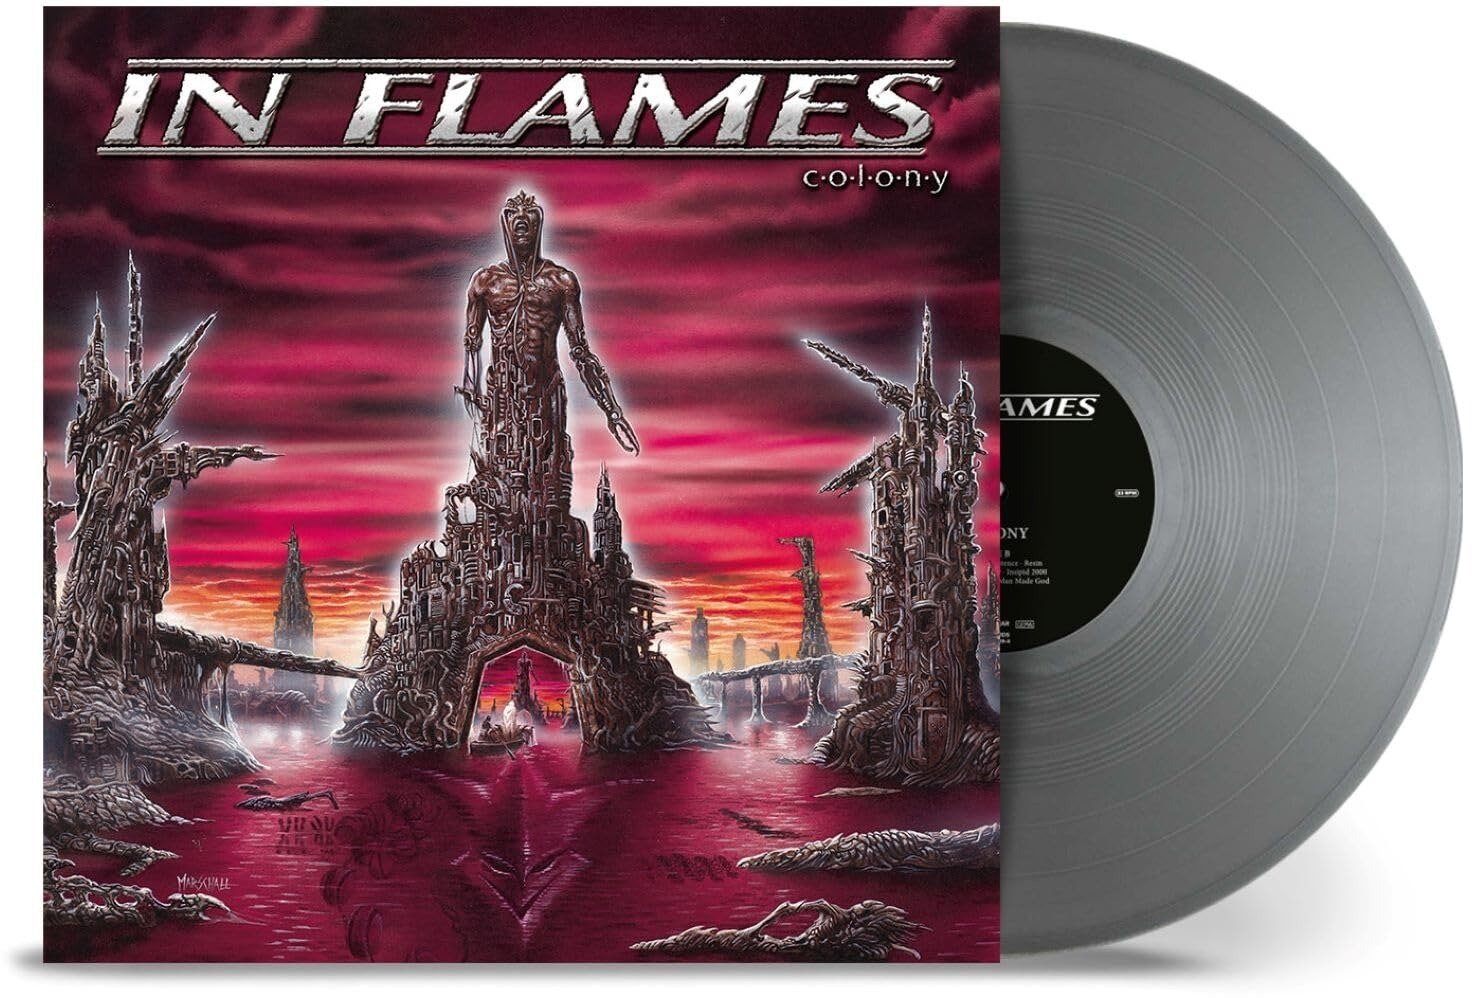 CD Shop - IN FLAMES COLONY